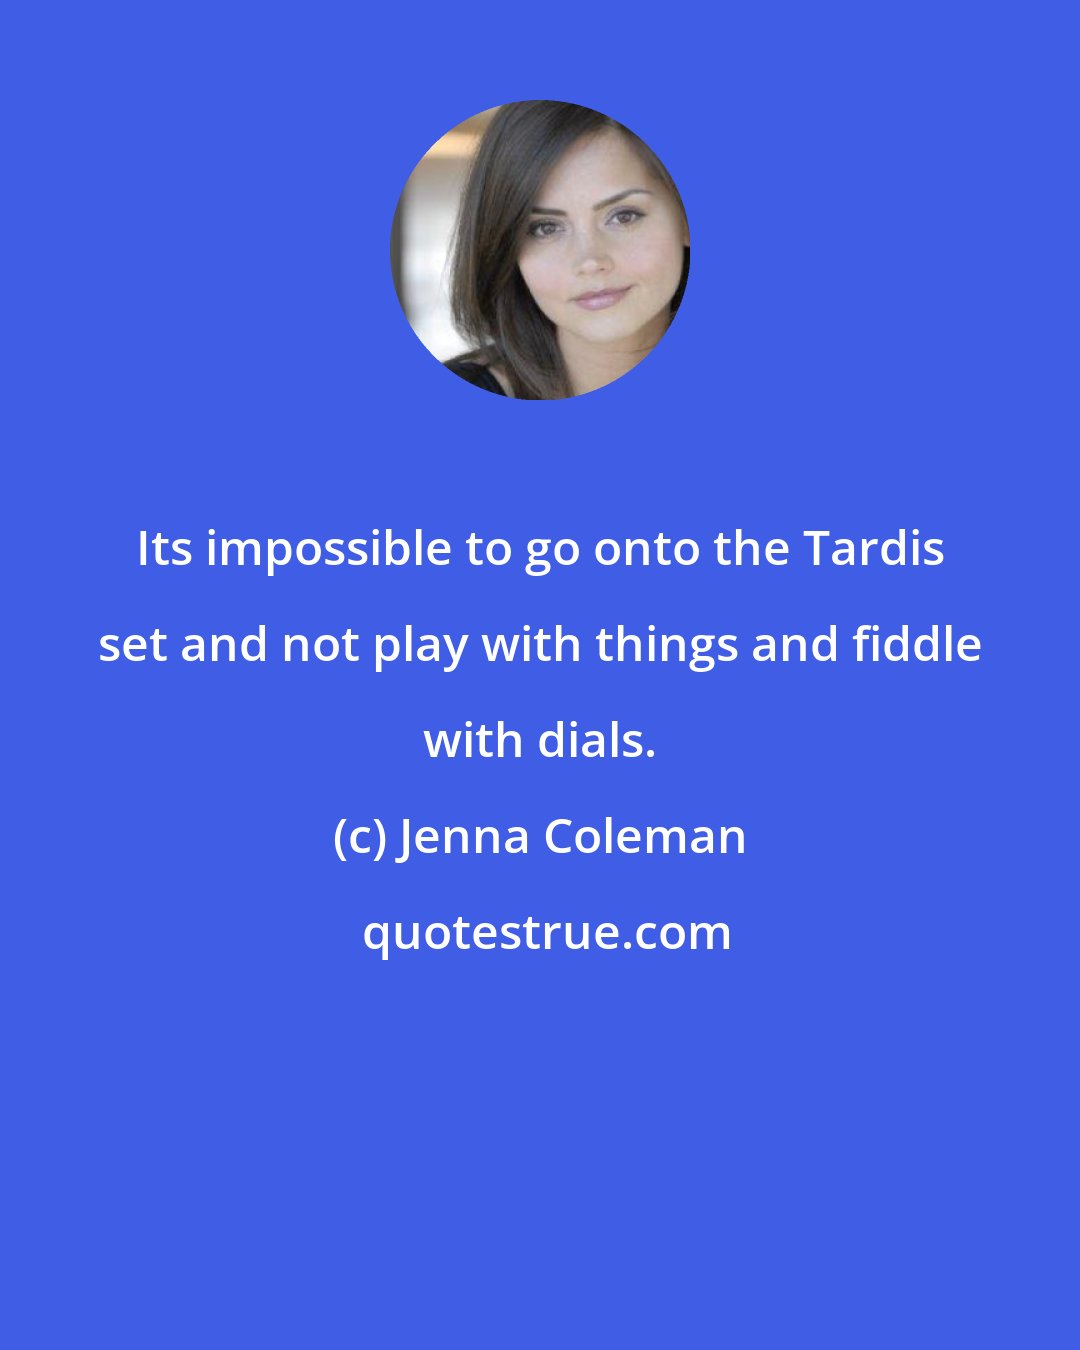 Jenna Coleman: Its impossible to go onto the Tardis set and not play with things and fiddle with dials.